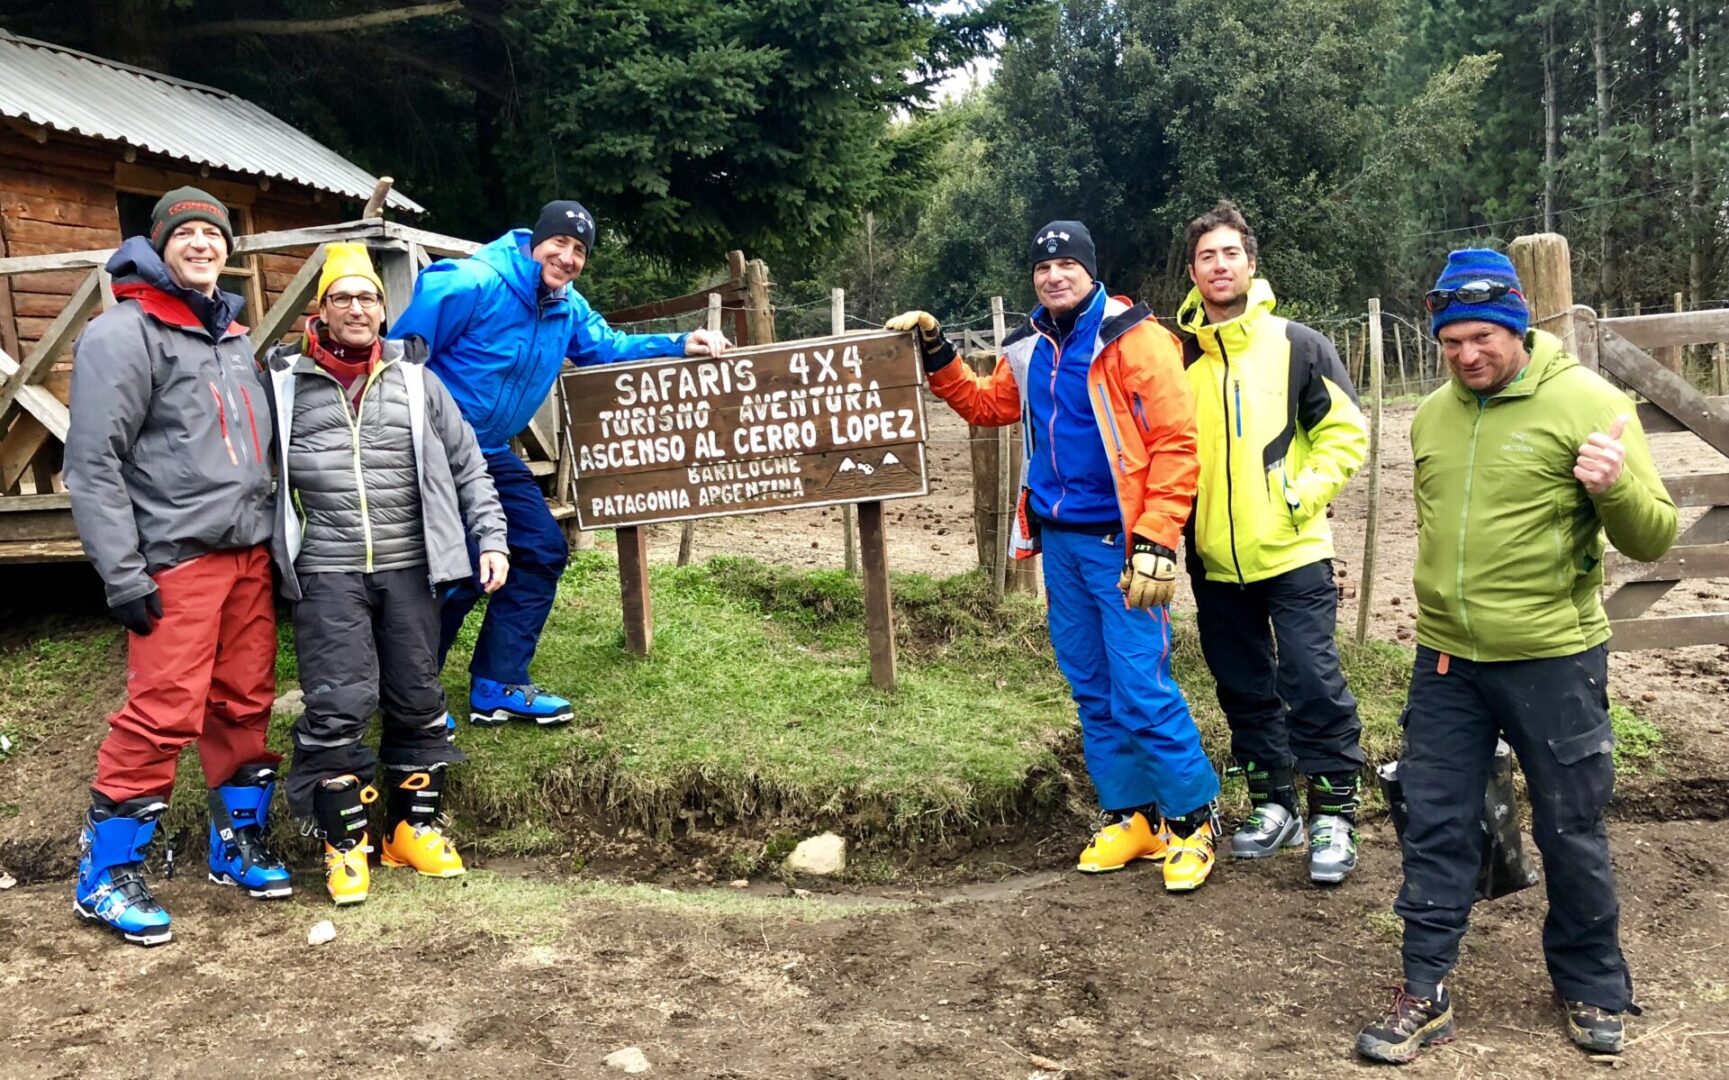 Hikers posing with a tourist site sign